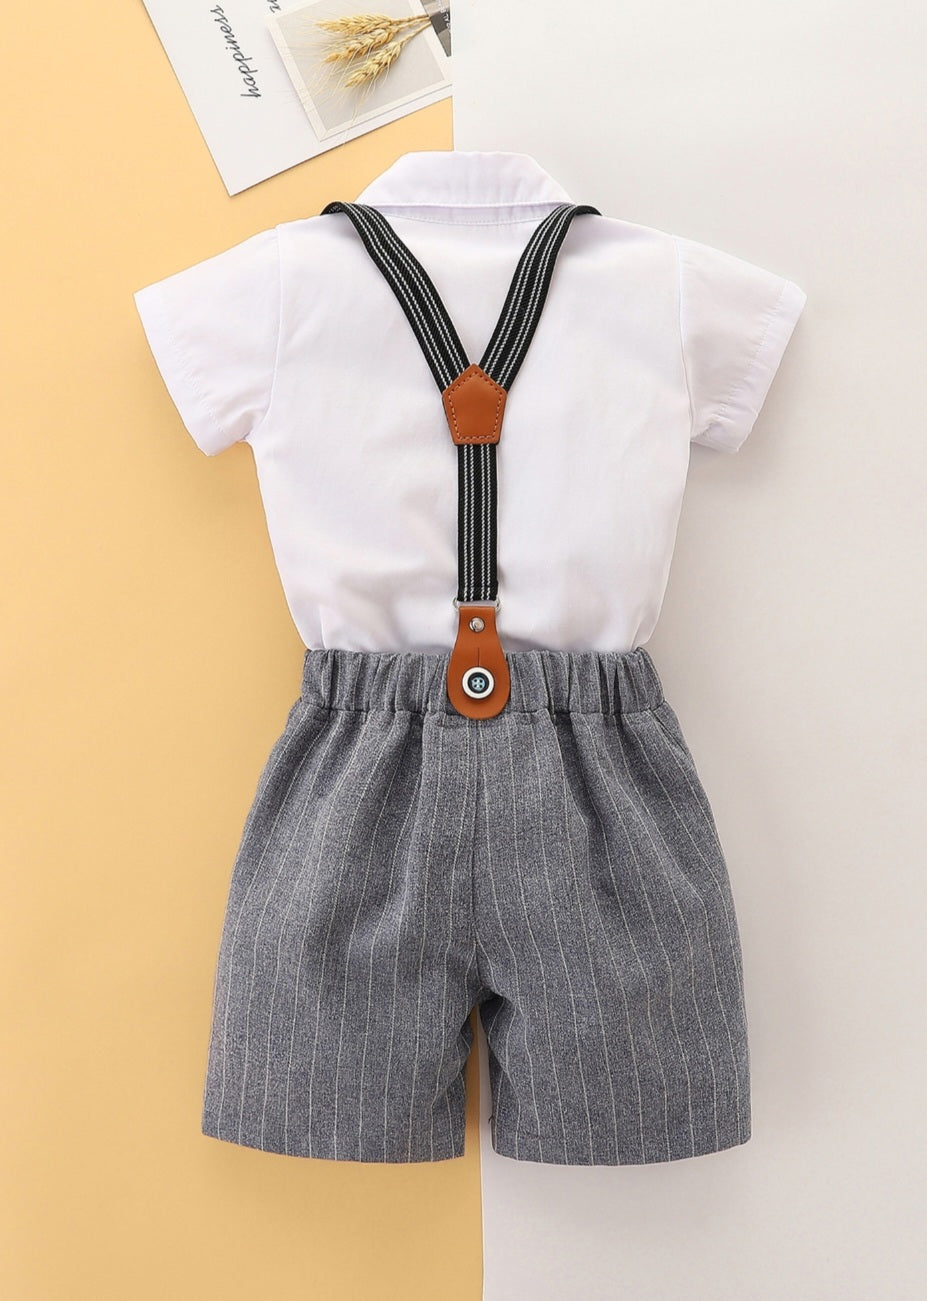 4PSC Gentleman Suit.   (Romper also available in younger boys with shirt)